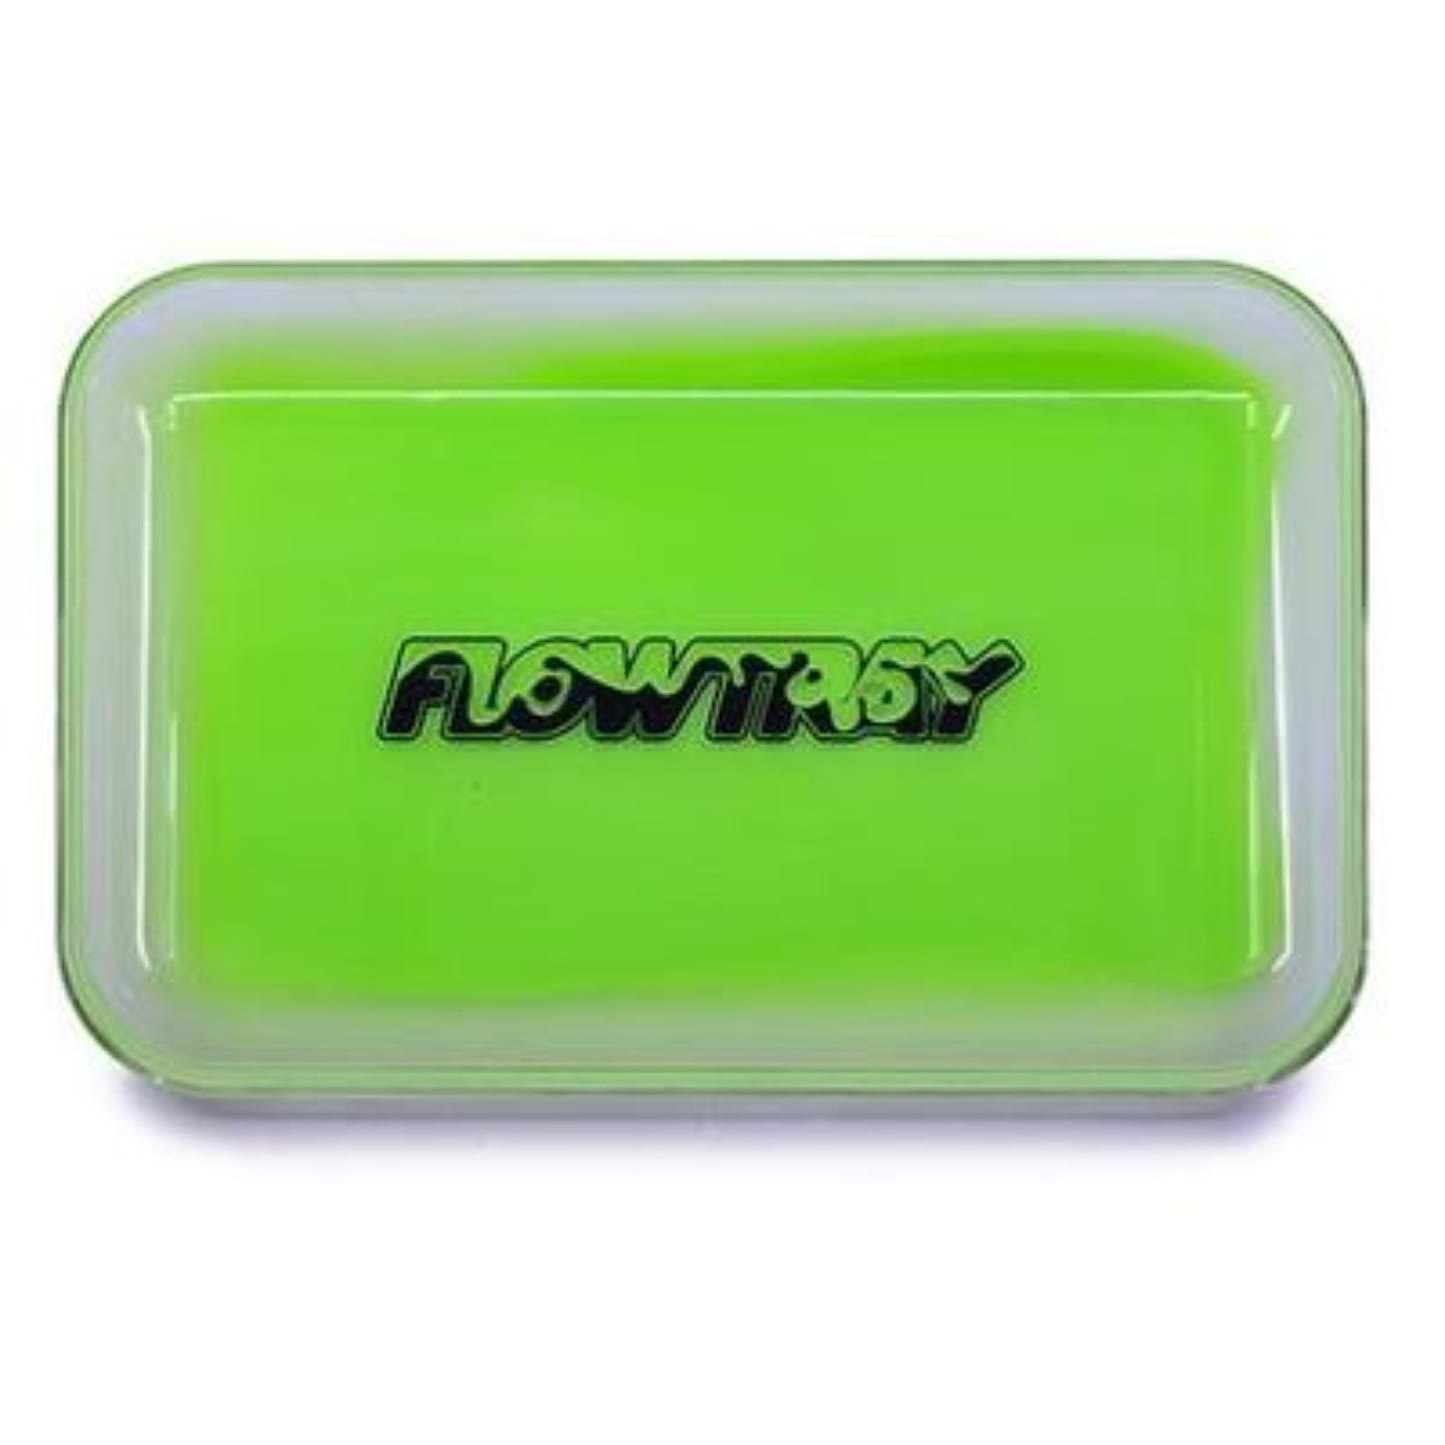 FlowTray Glow In the Dark Rolling Tray - 9.5in Green